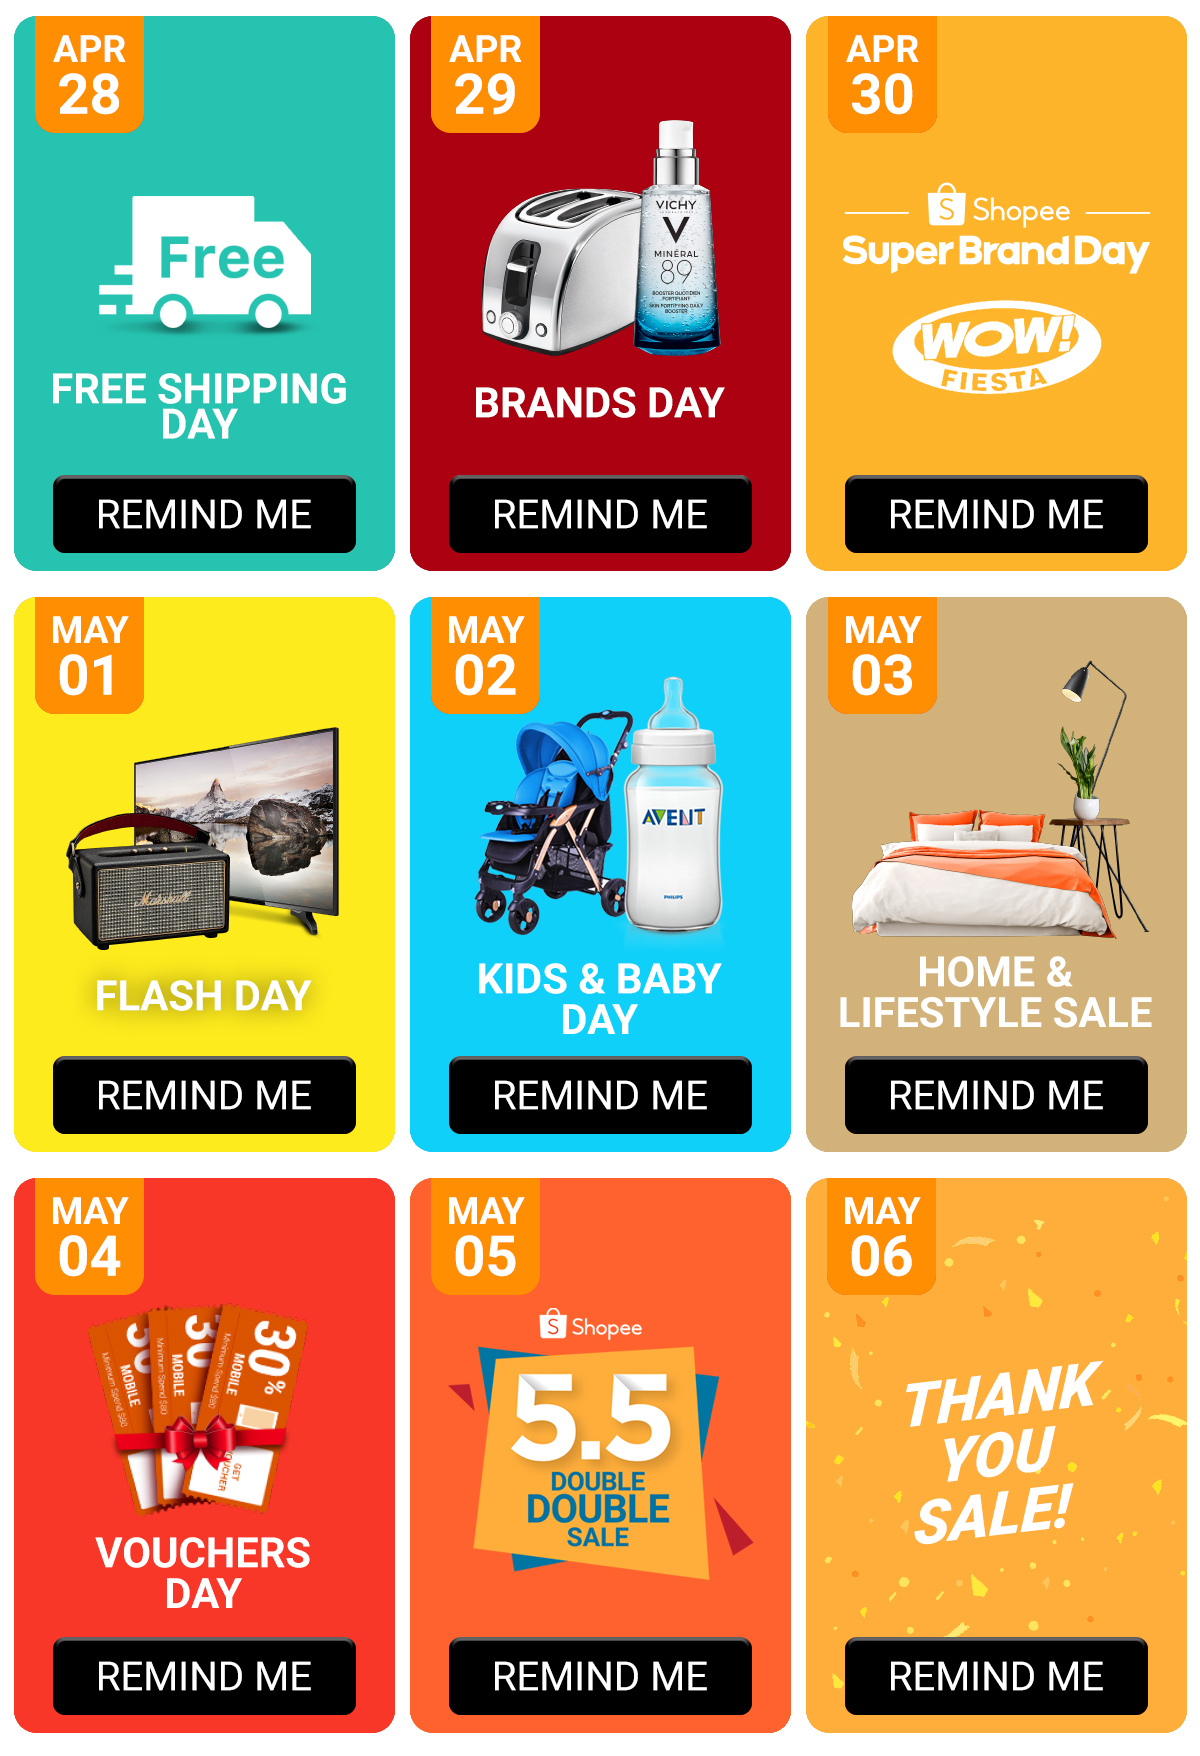 Shopee 5.5 Double Double Sale + Kids and Baby Day Voucher Inside!